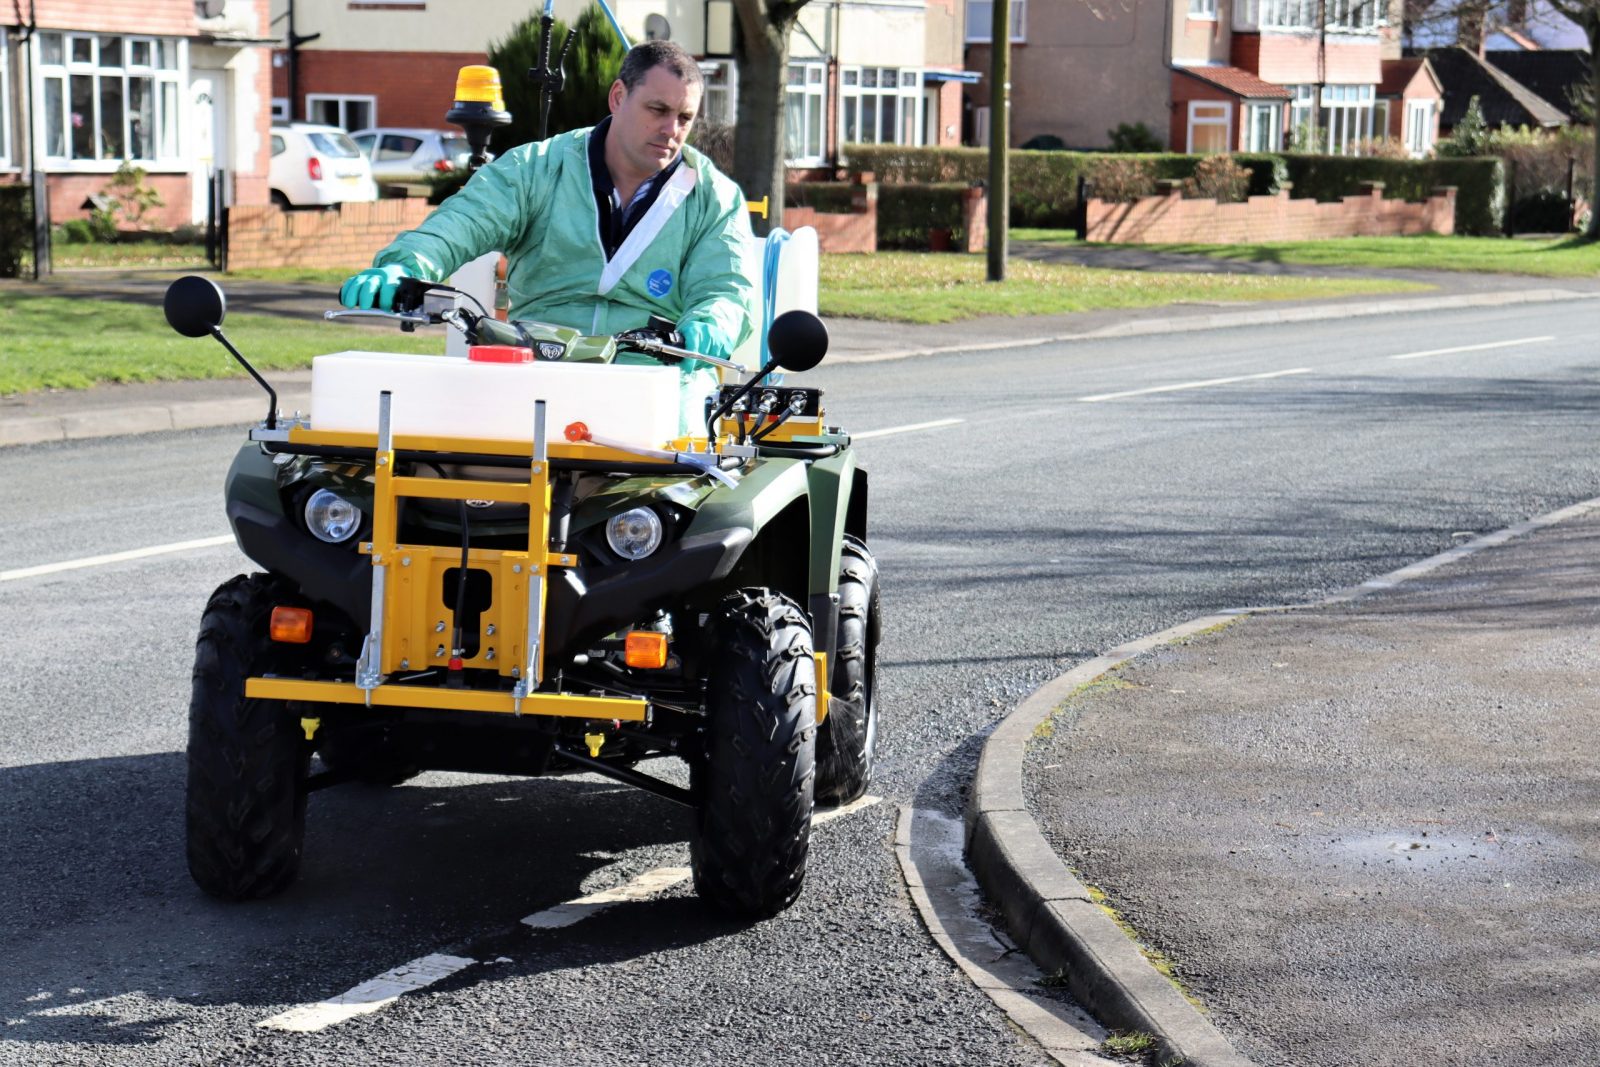 With VALE Engineering’s PKL450 ATV quad bike mounted weed sprayer operators can control spray whilst in motion with both hands on the handlebars.